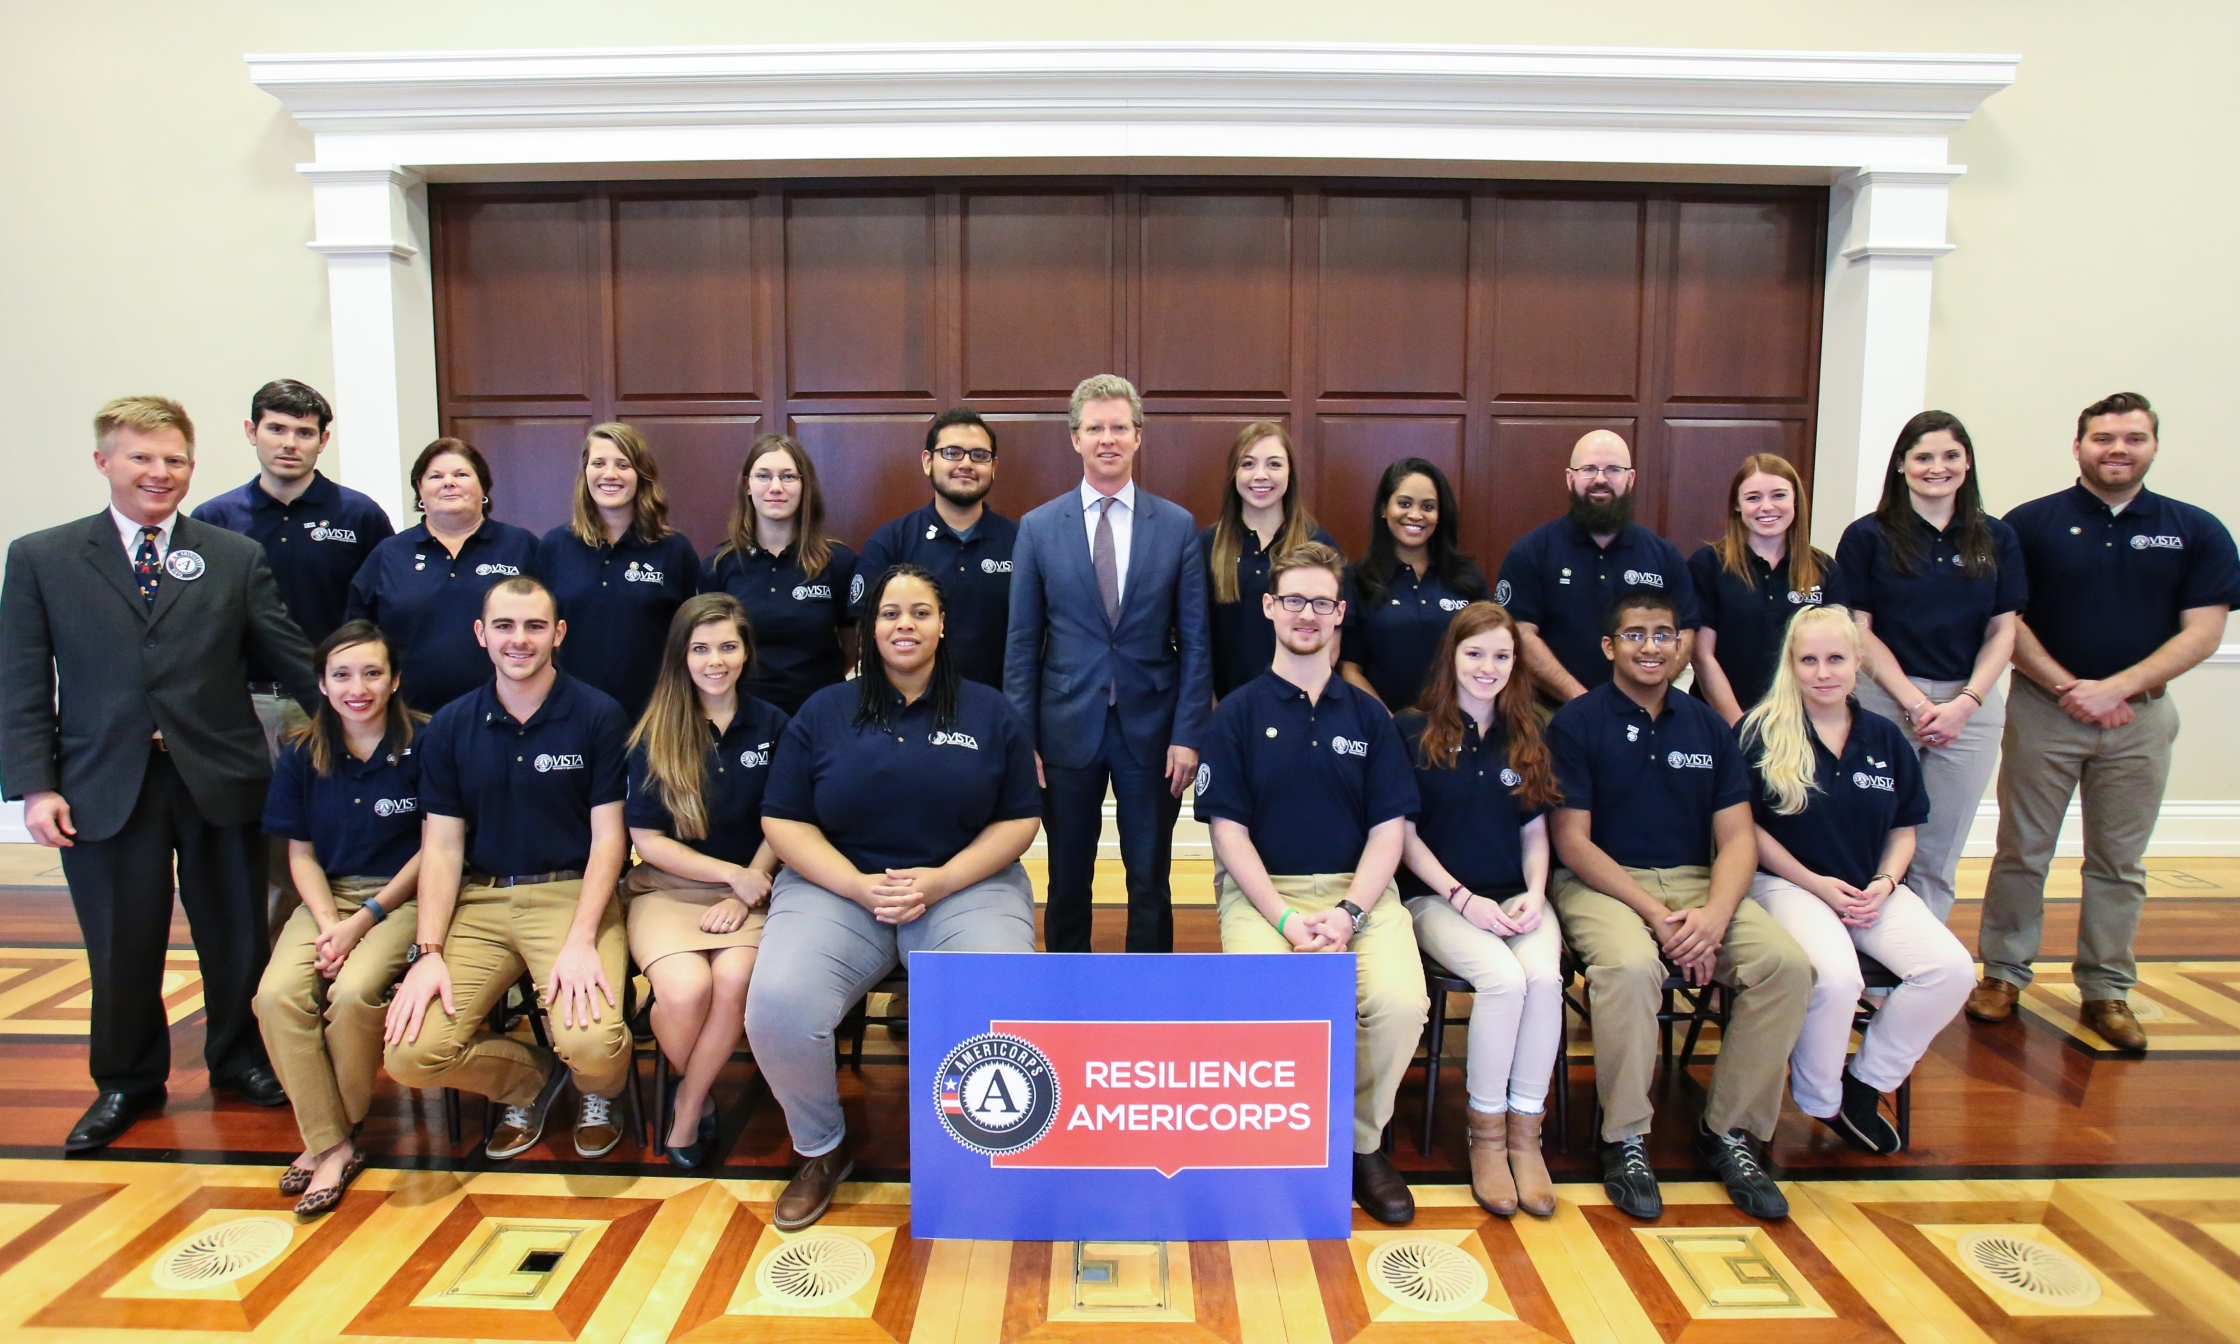 Resilience AmeriCorps members met at the White House to be sworn in with the Director of the Office of Management and Budget, Shaun Donovan. Photo courtesy of  the Corporation for National and Community Service.